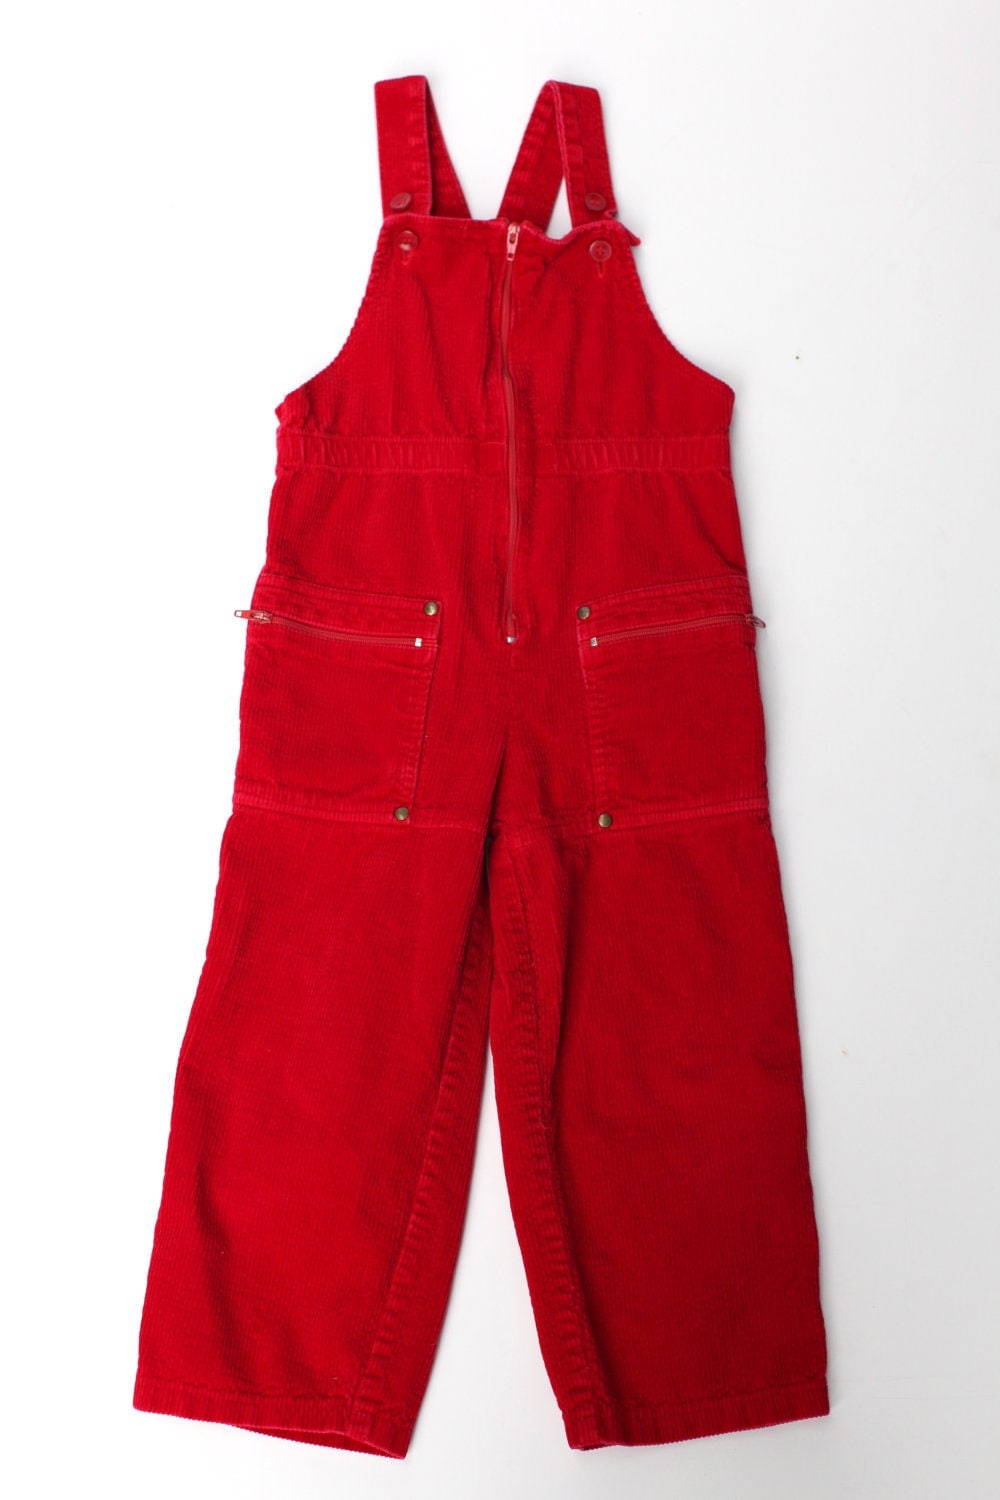 Size 3T red corduroy overalls by thisvintagething on Etsy